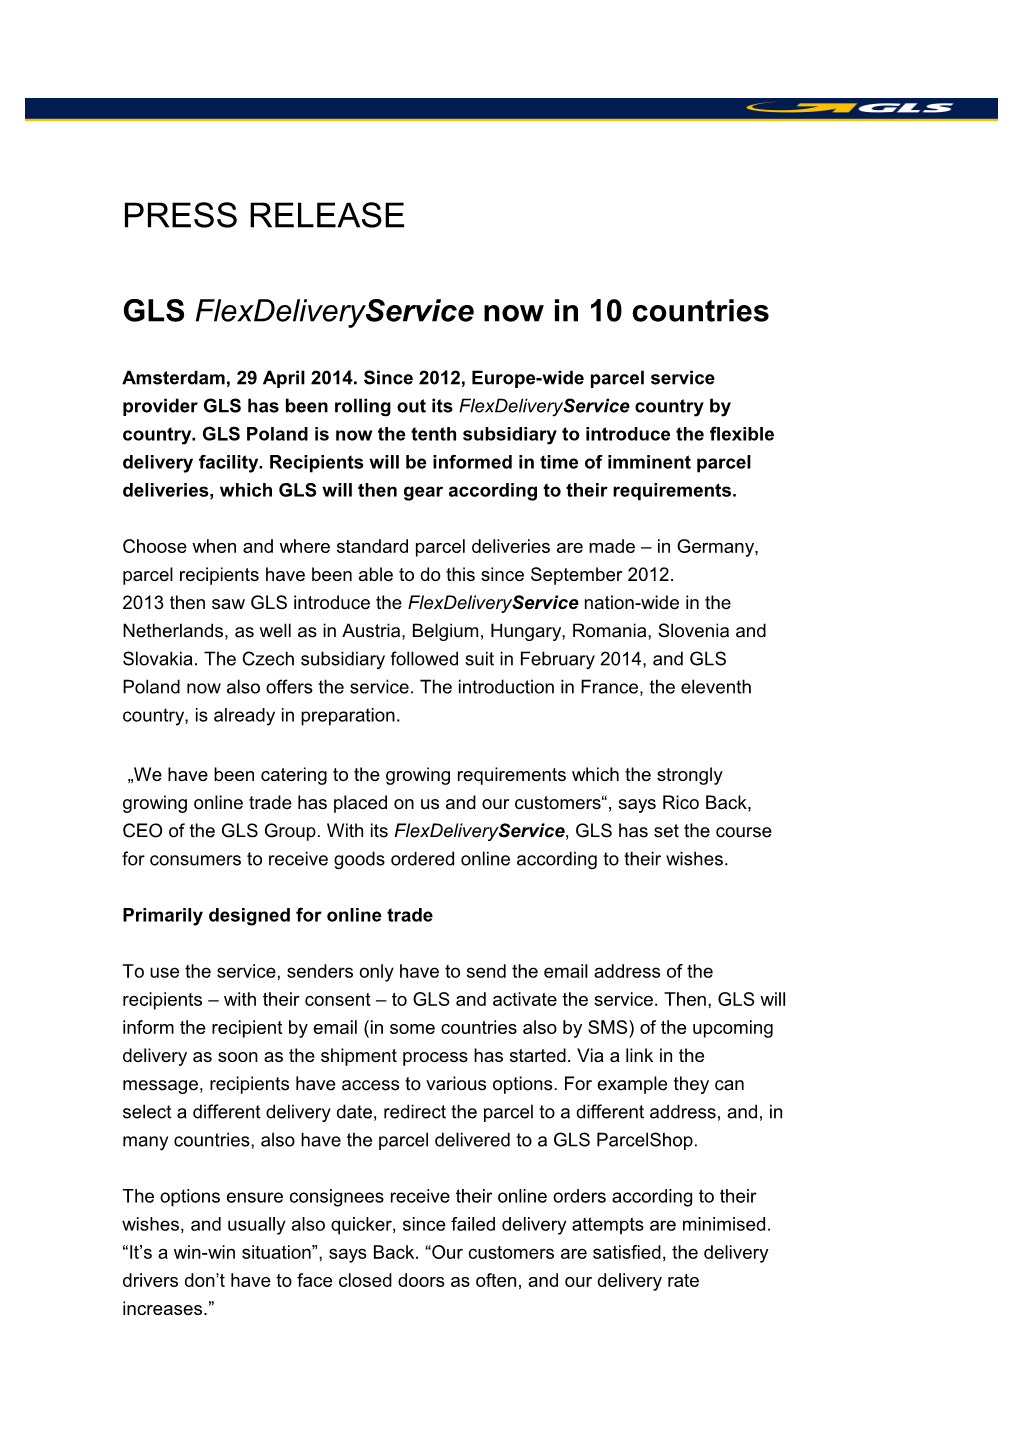 GLS Flexdelivery Servicenow in 10 Countries